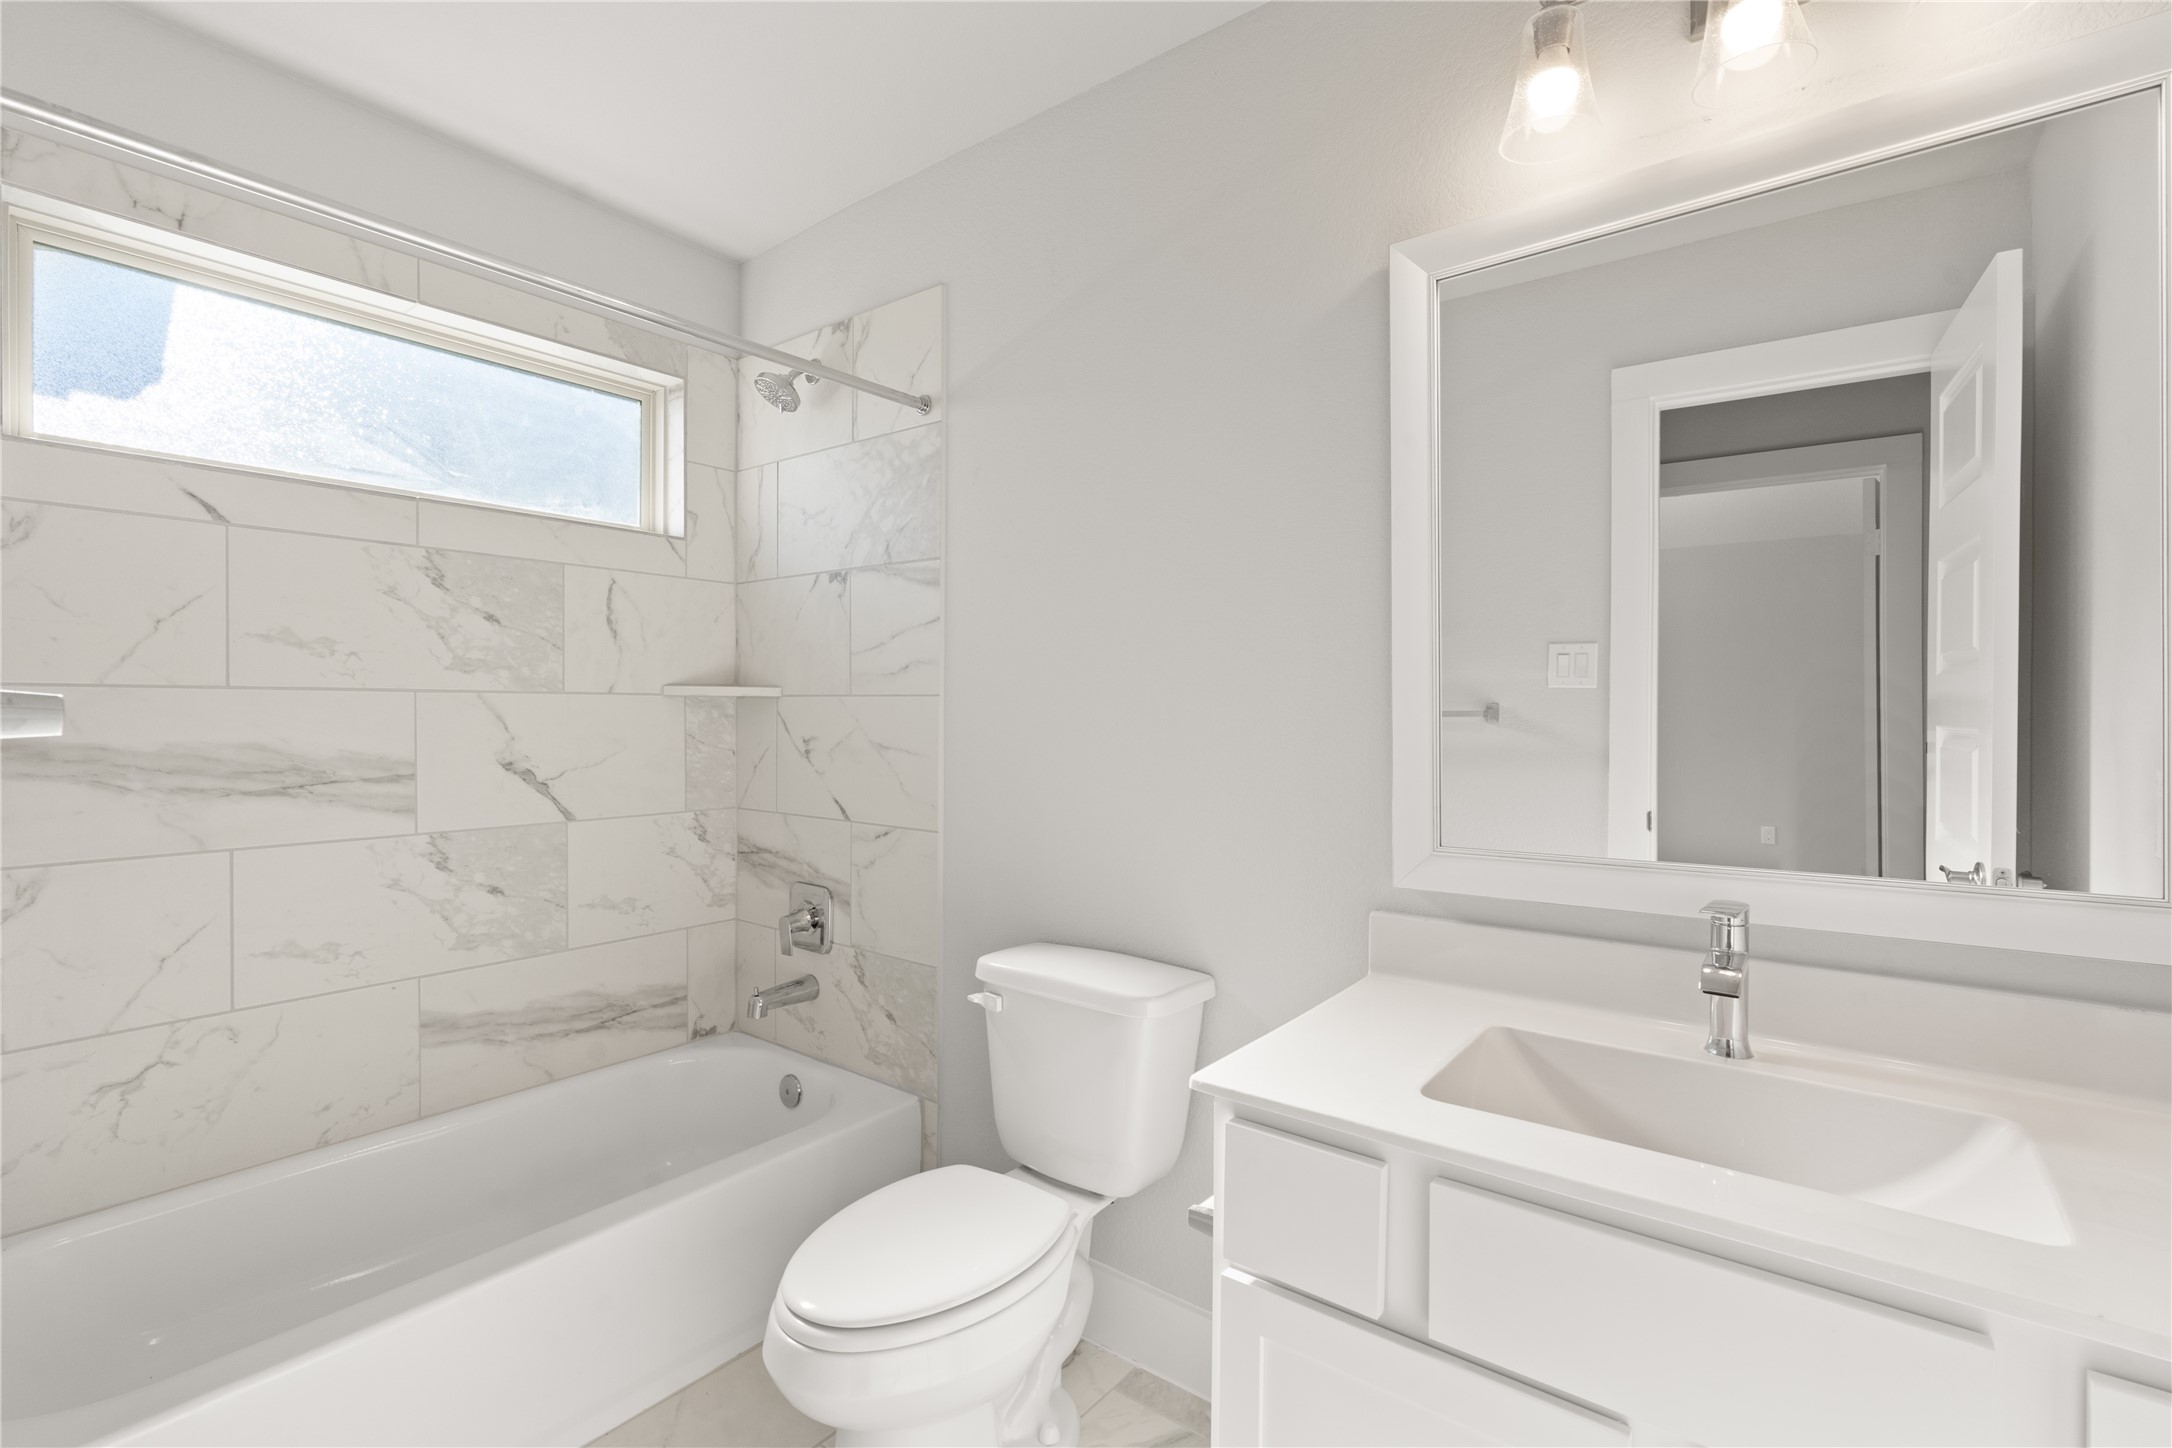 Secondary bath features tile flooring, bath/shower combo with tile surround, white stained wood cabinets, beautiful light countertops, mirror, dark, sleek fixtures and modern finishes.
